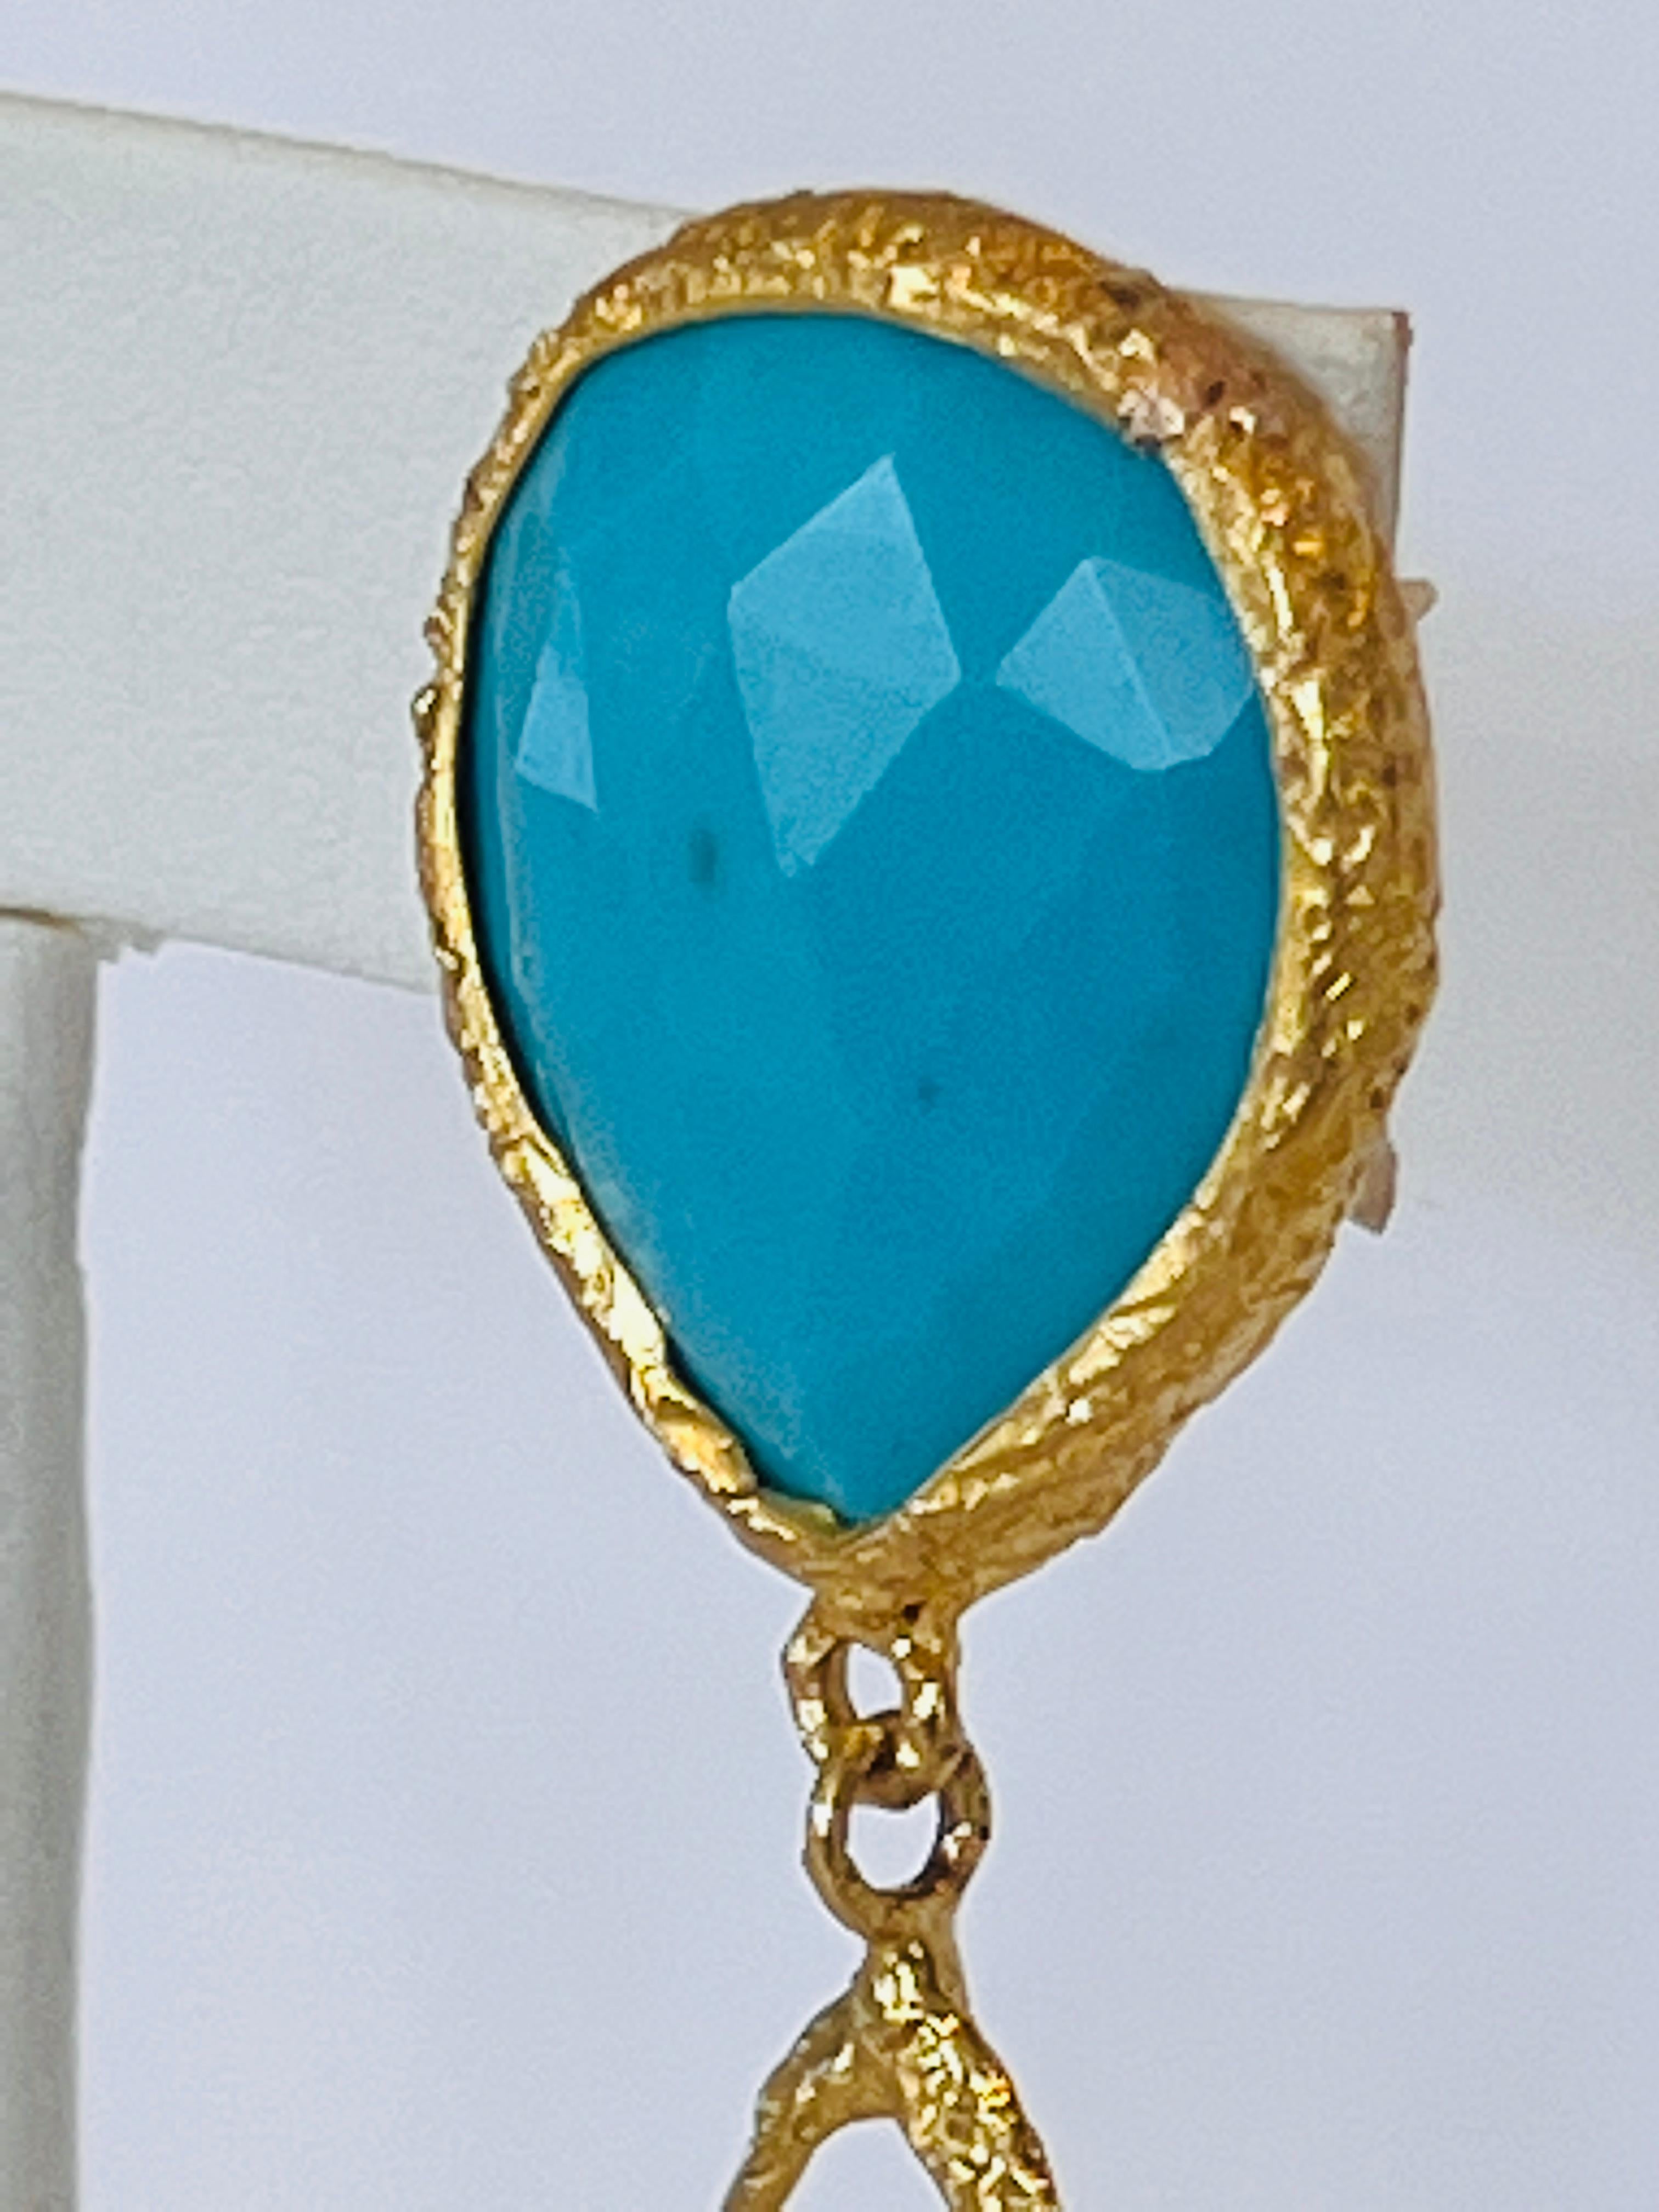 Tagili Signature Teardrop Earrings with Turquoise in 22k Gold In New Condition For Sale In New York, NY